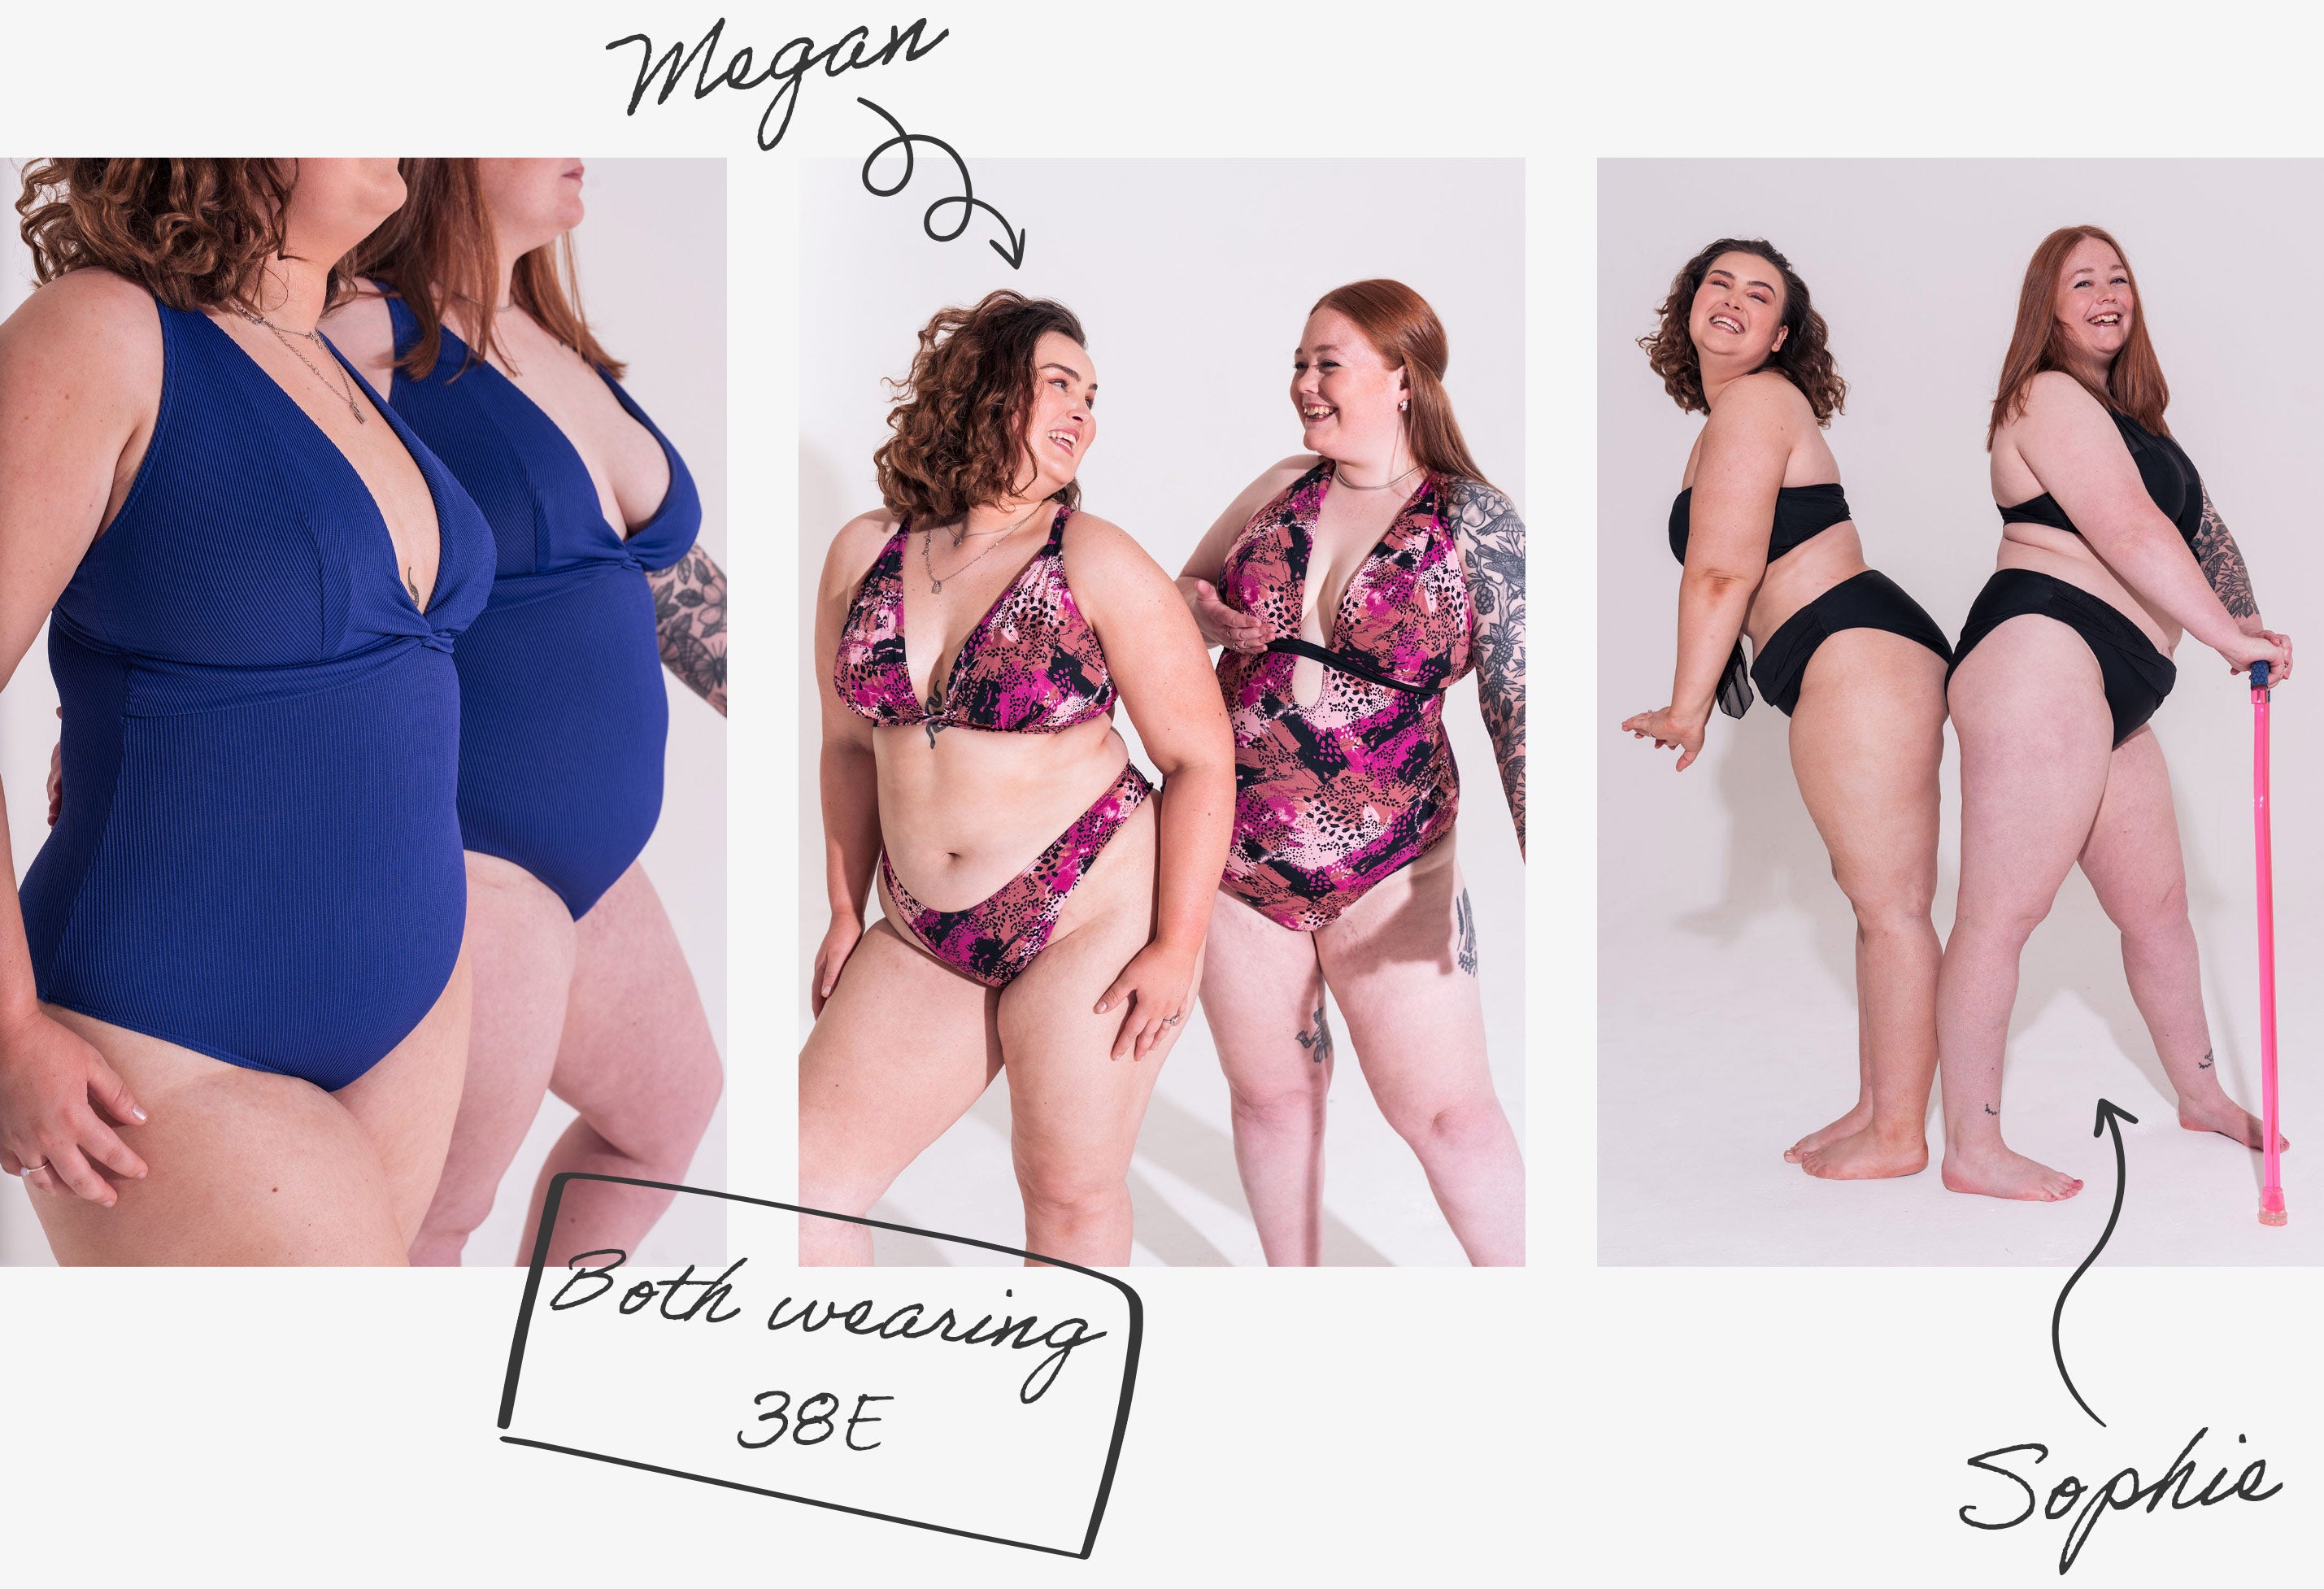 Megan and Sophie both wear a 38E!